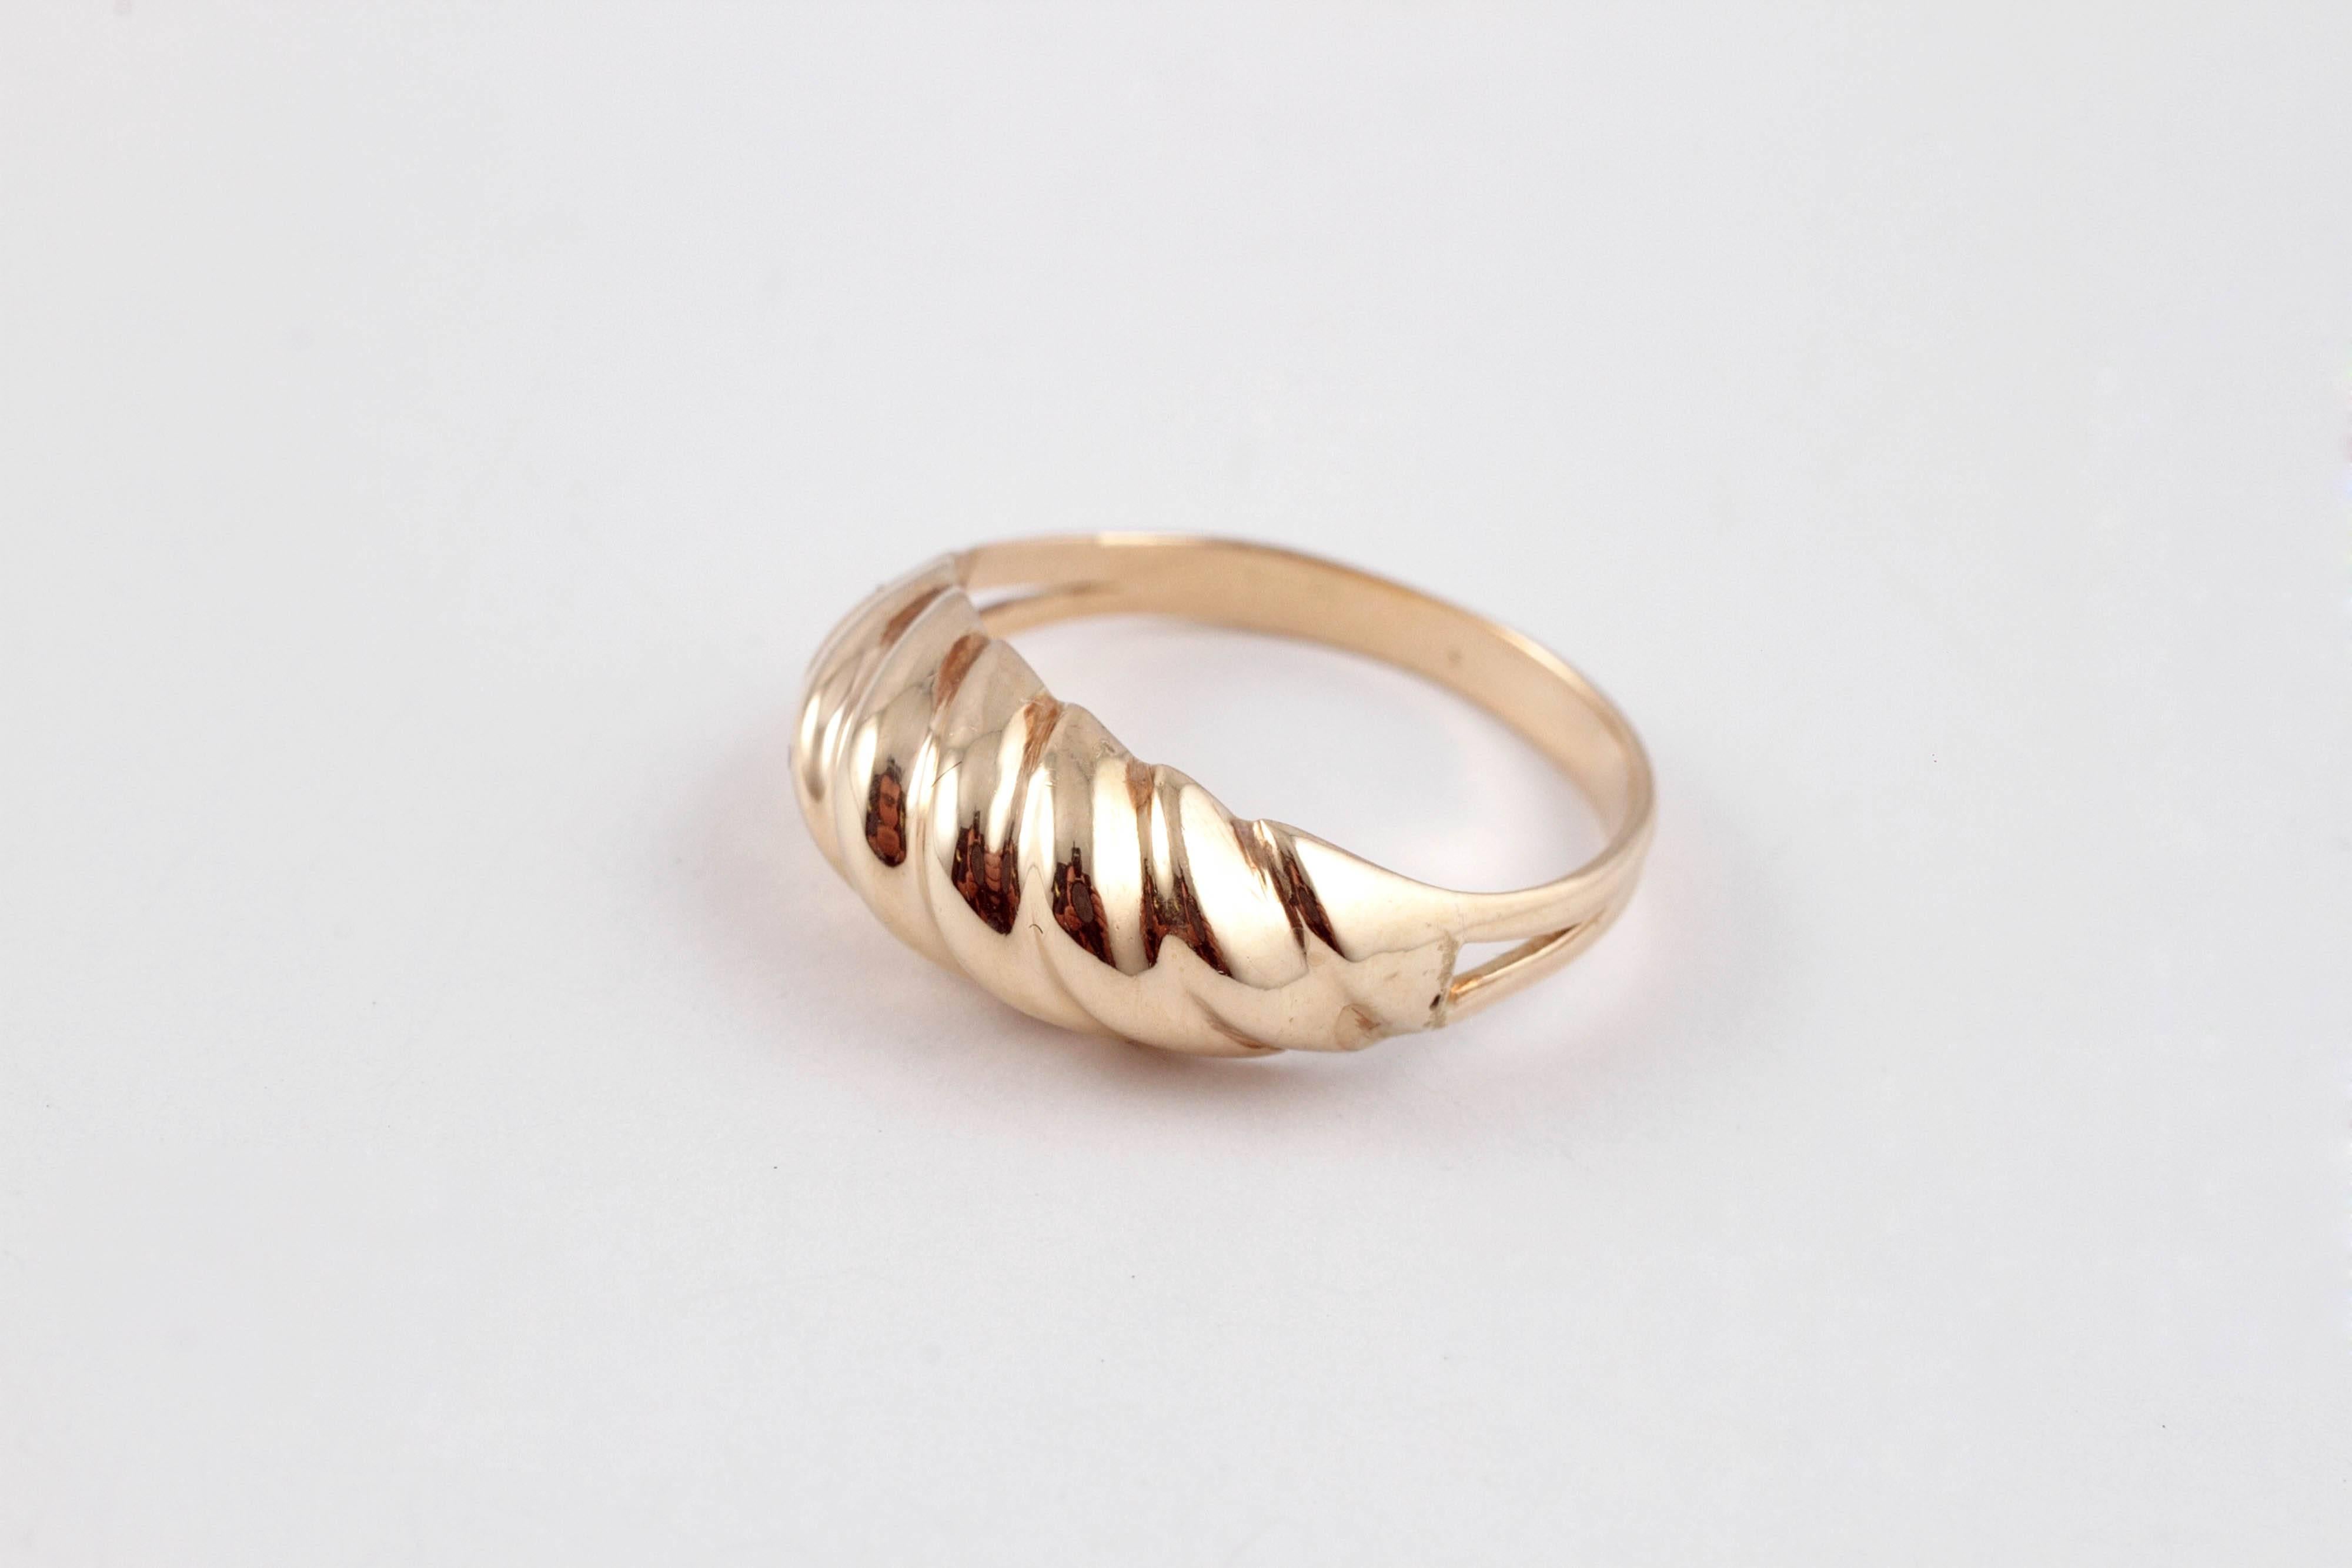 Fun for every day wearing!  Size 5.25, in 10 karat yellow gold.